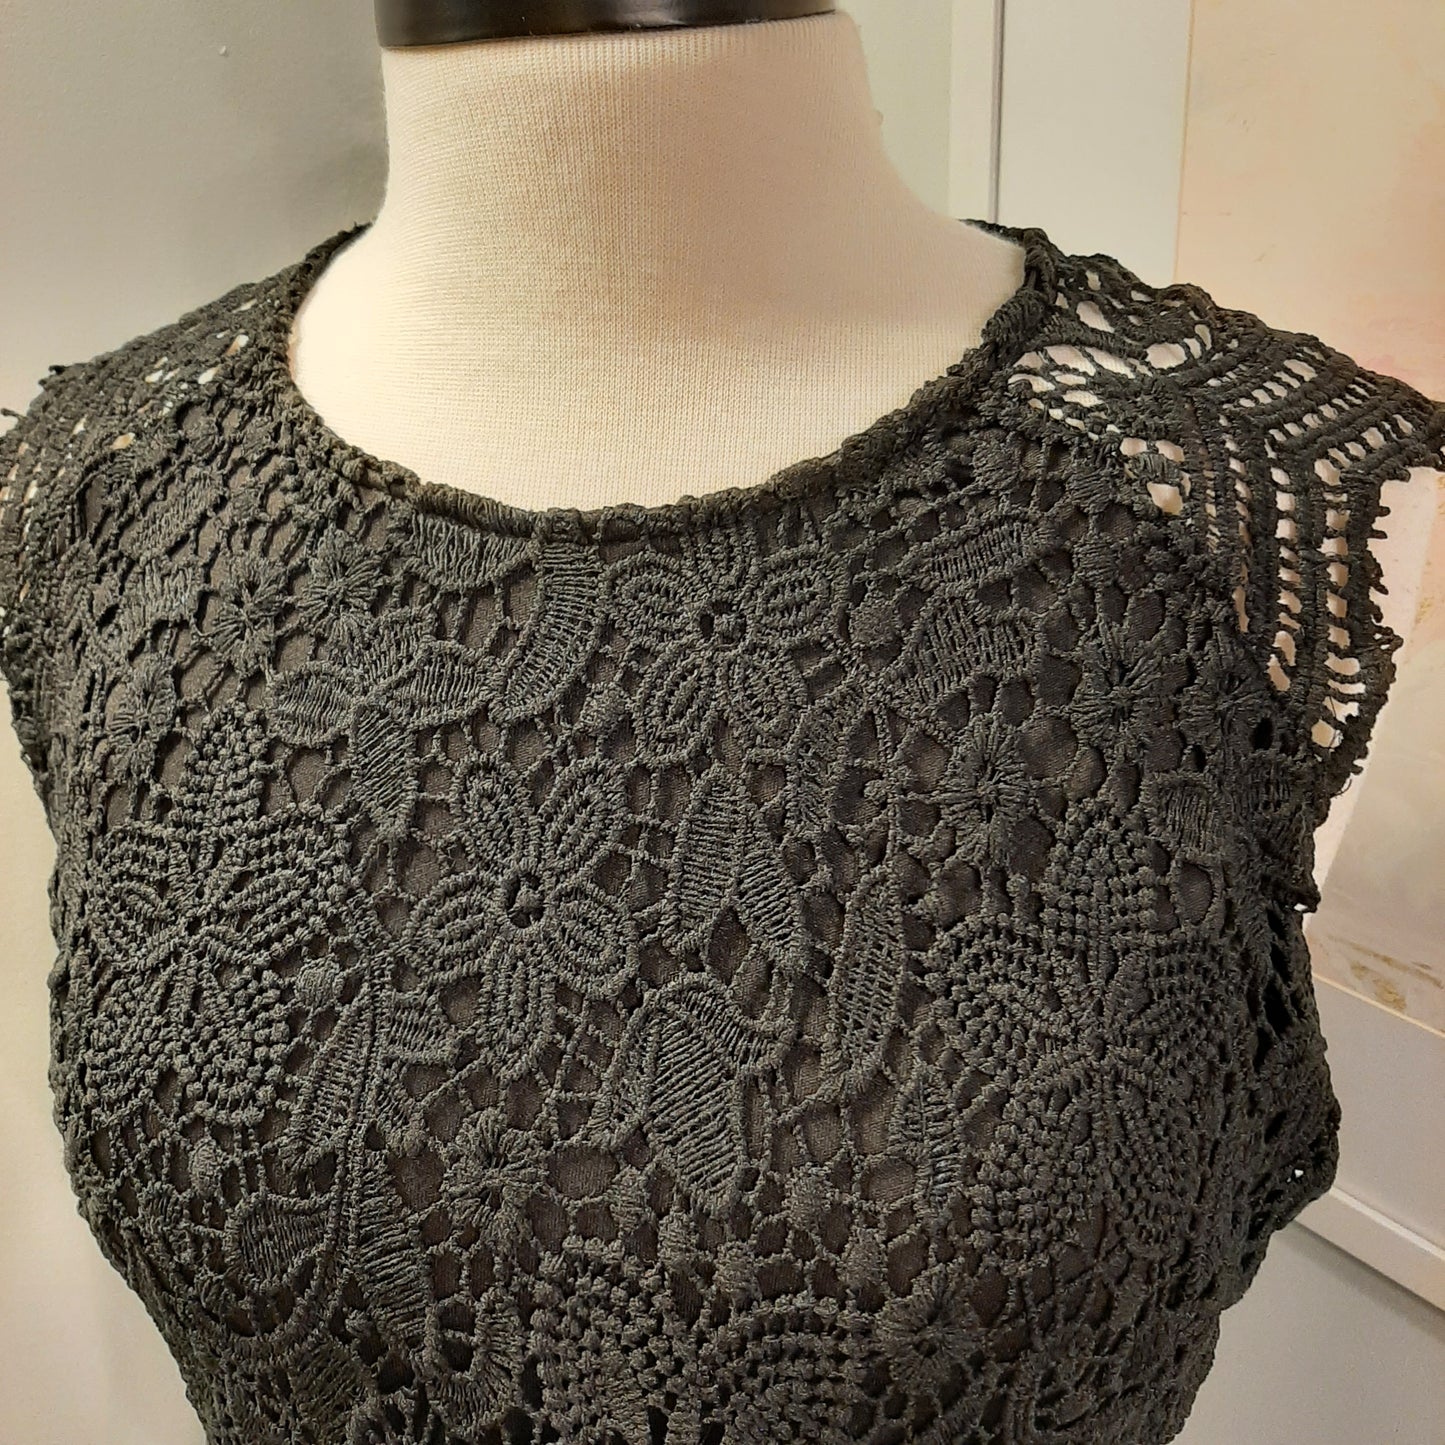 Timeless Beauty in Black Lace